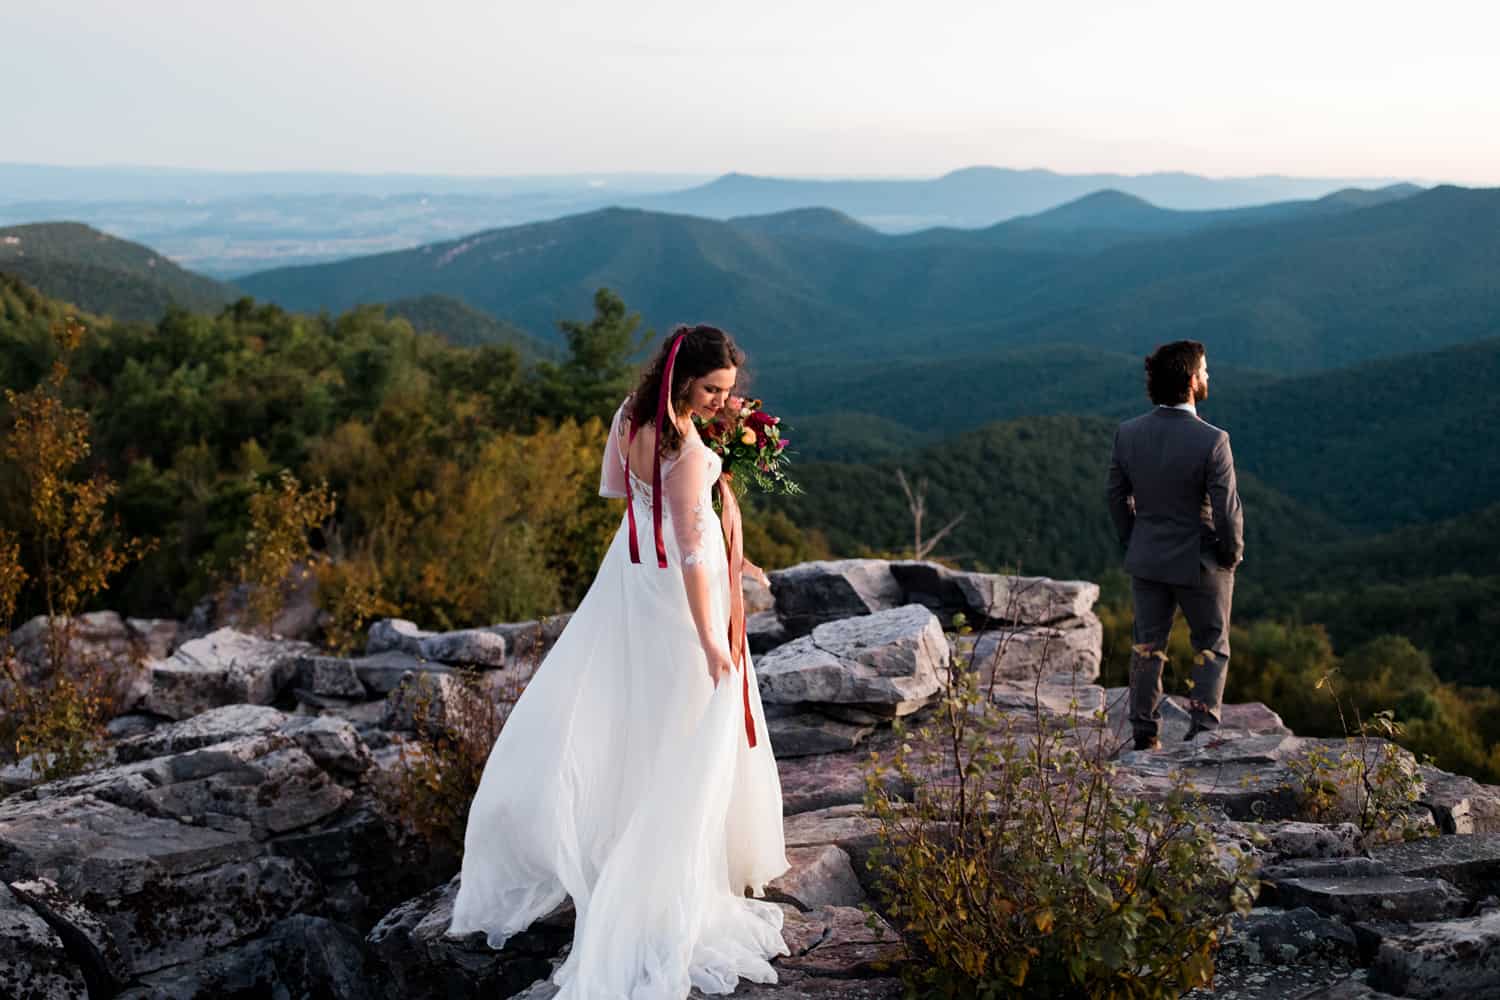 A woman in a white wedding dress looks over her right shoulder as she picks up her dress. Her groom waits for her facing out toward the mountains. Blue mountains are in the background and they are in a national park.